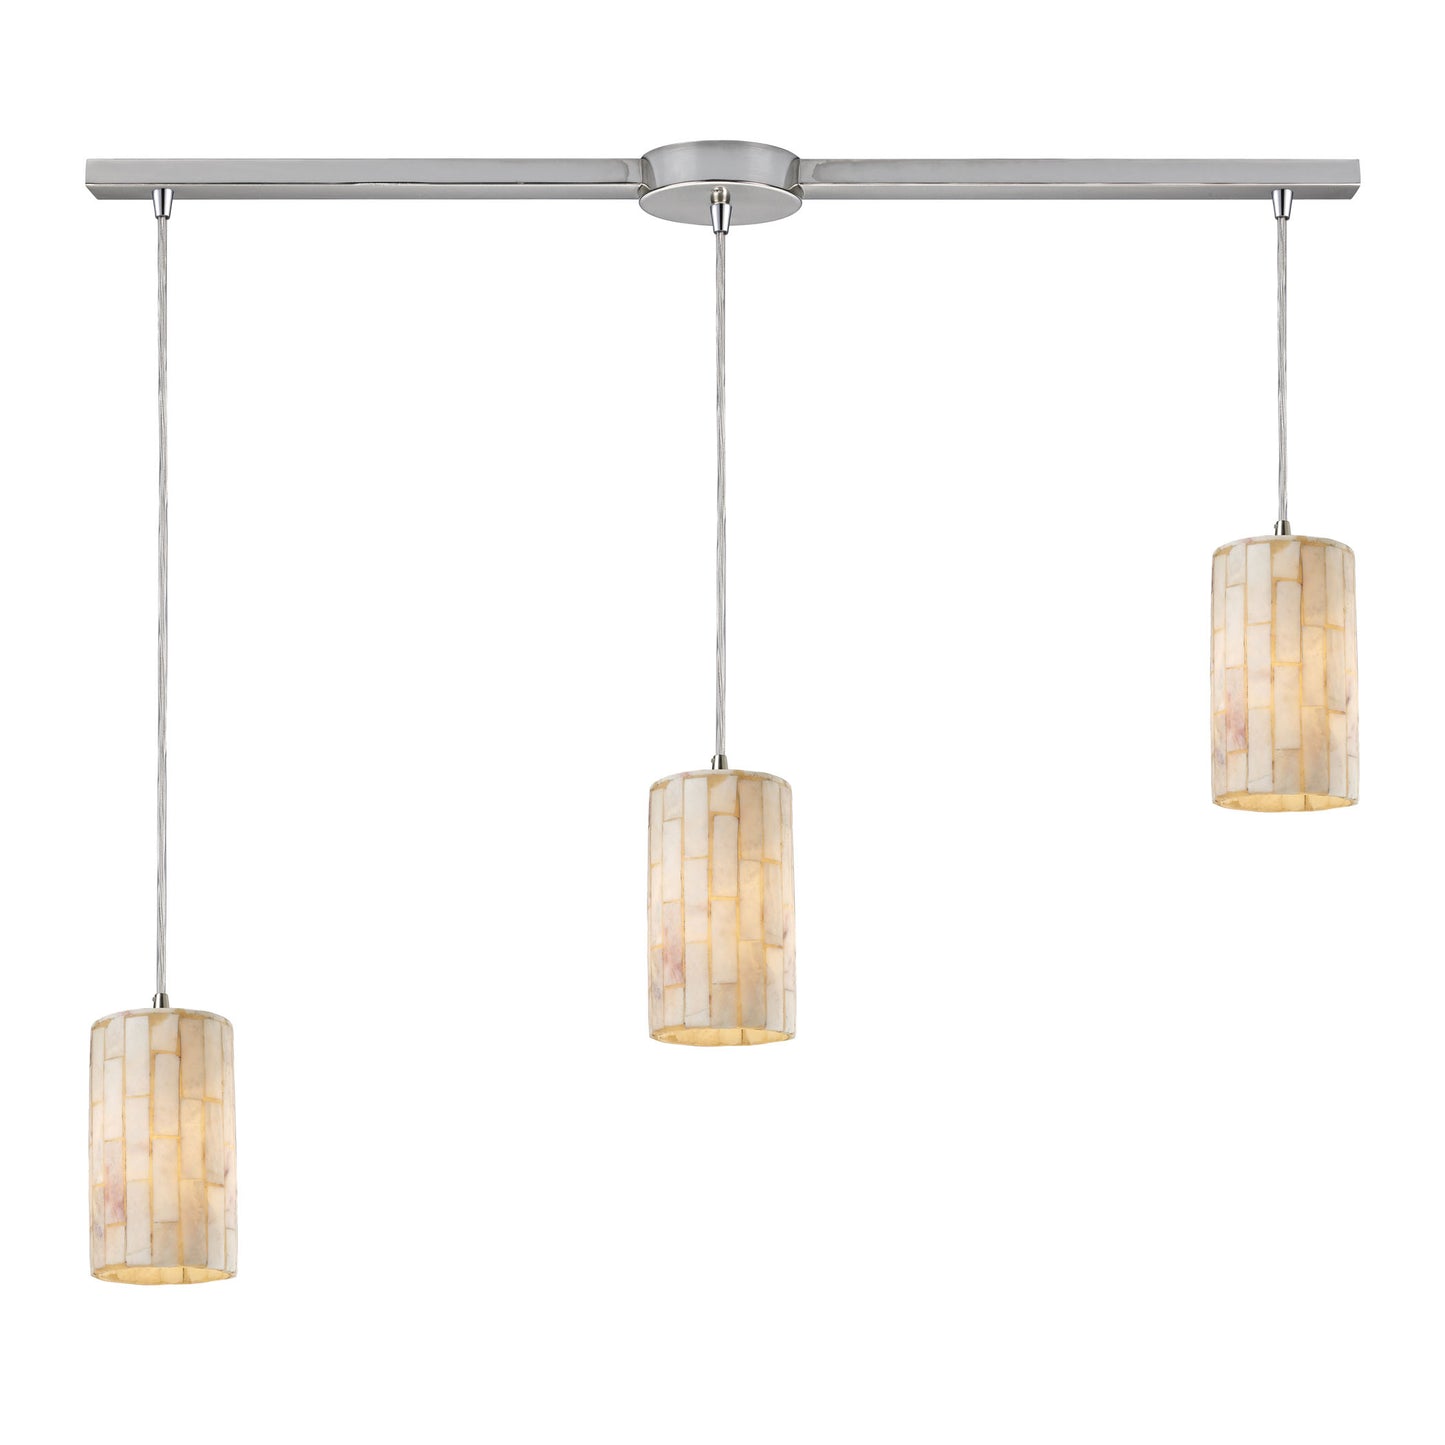 Coletta 3-Light Linear Pendant Fixture in Satin Nickel with Genuine Stone Shade